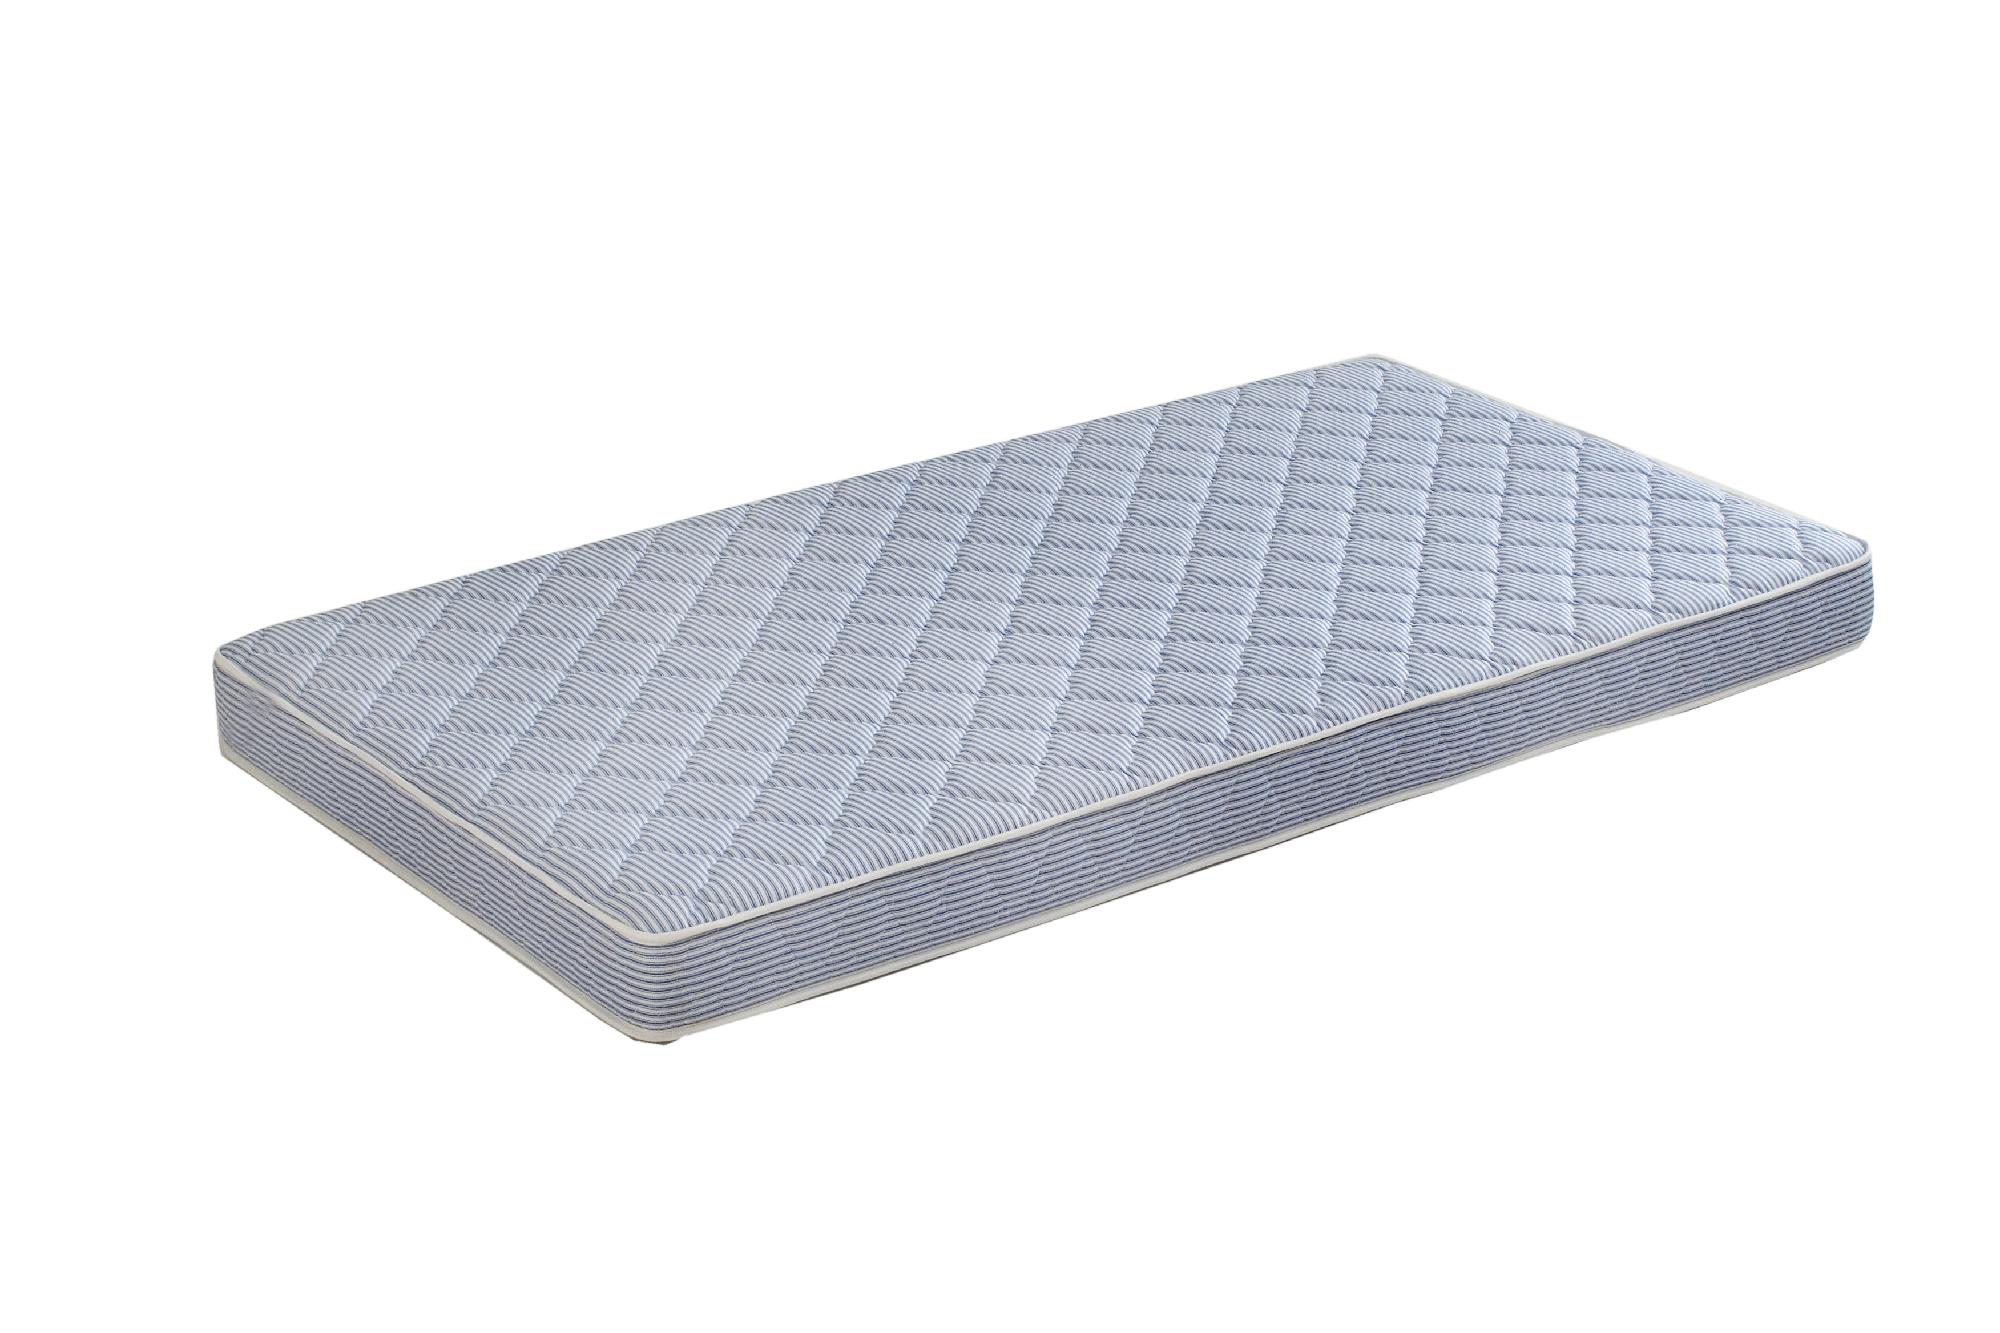 Innerspace Luxury Products 6.5-inch Truck Luxury Reversible Mattress Only - Quilted Both Sides